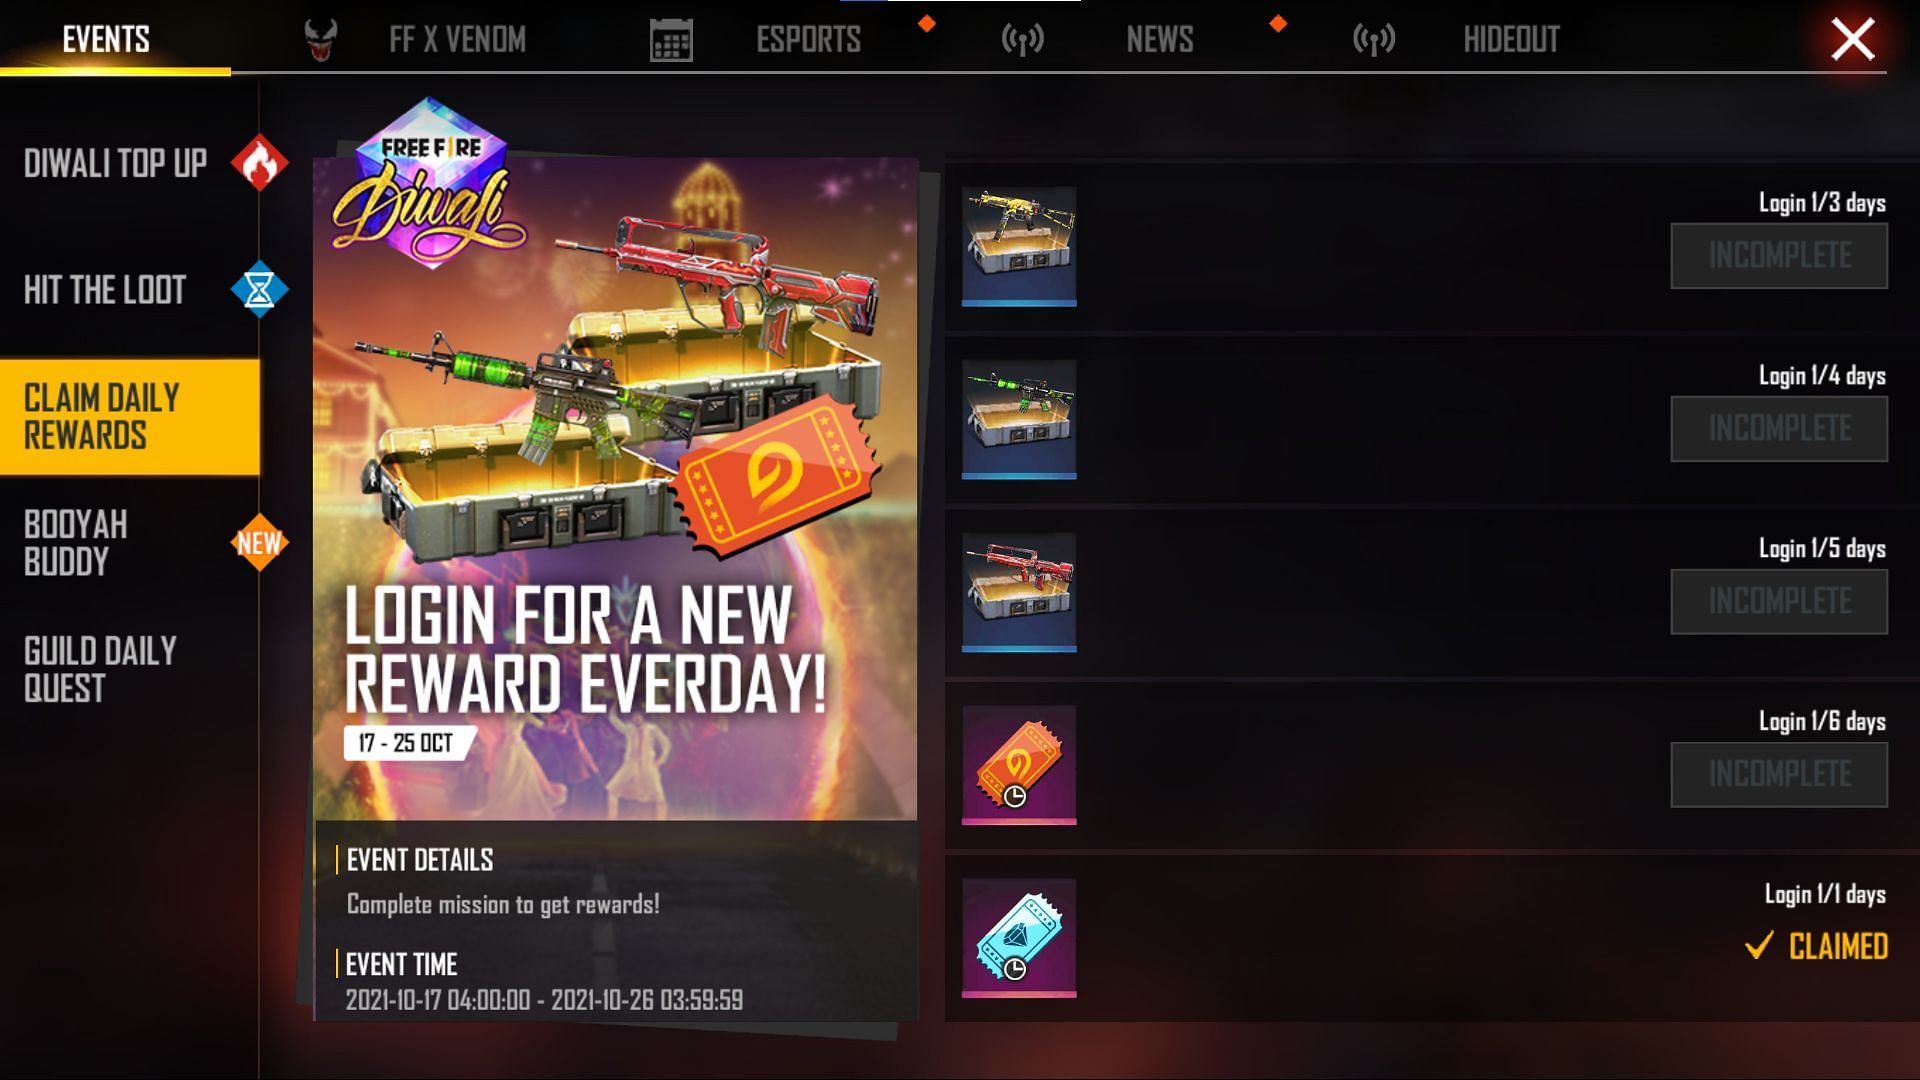 Log in every day to get free rewards including vouchers and loot crates (Image via Free Fire)